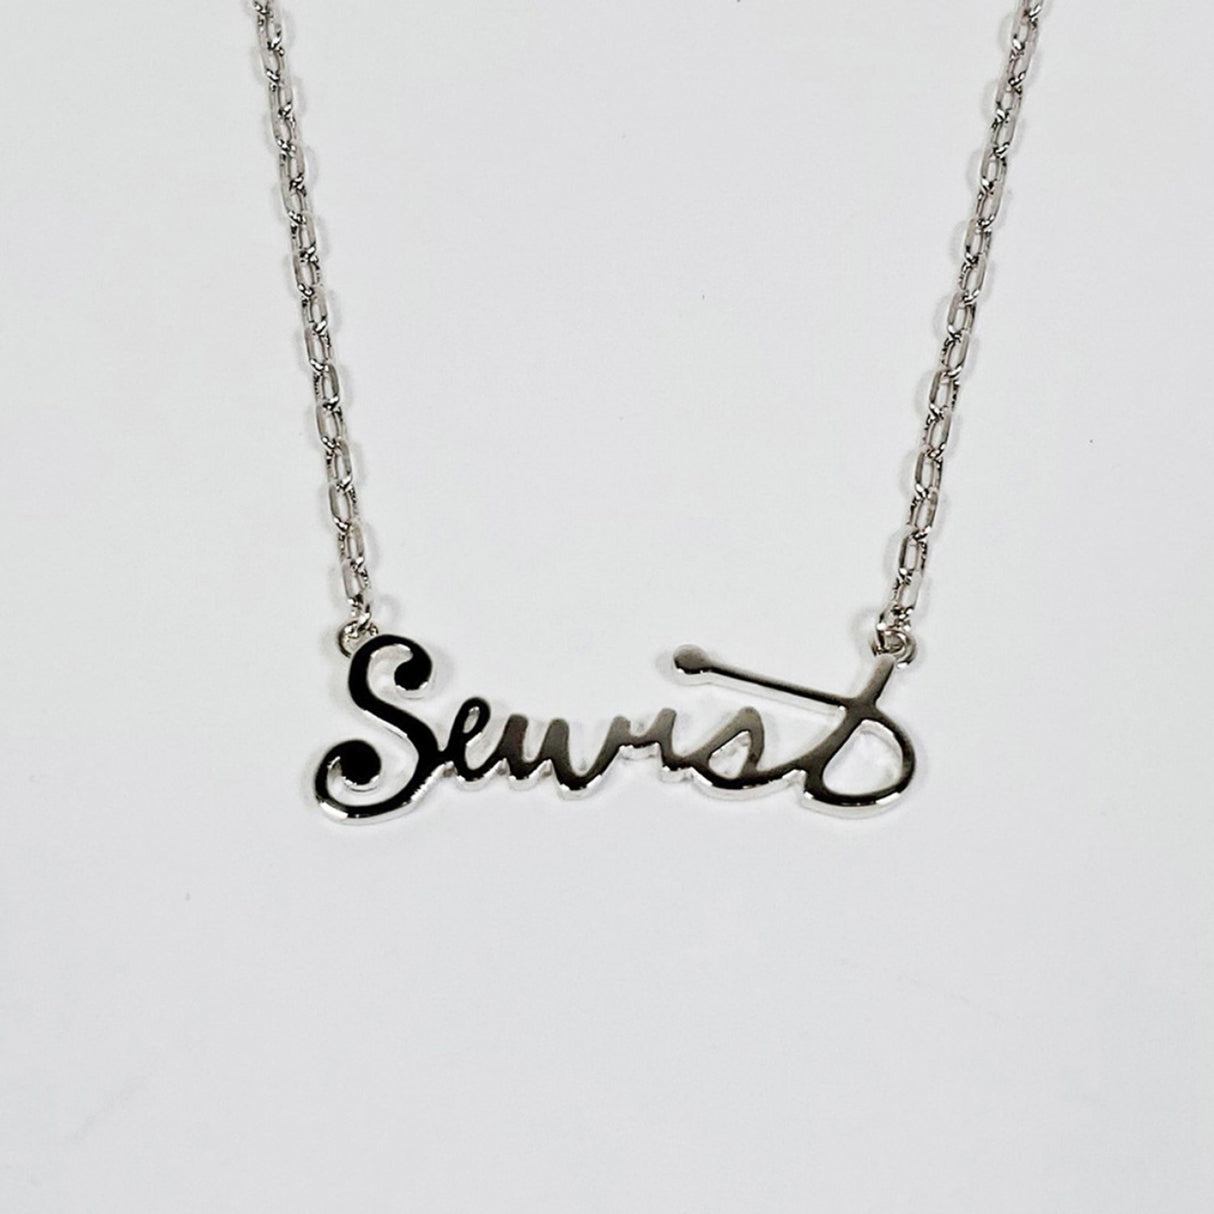 Sewist Necklace Silver by Quilt Spot